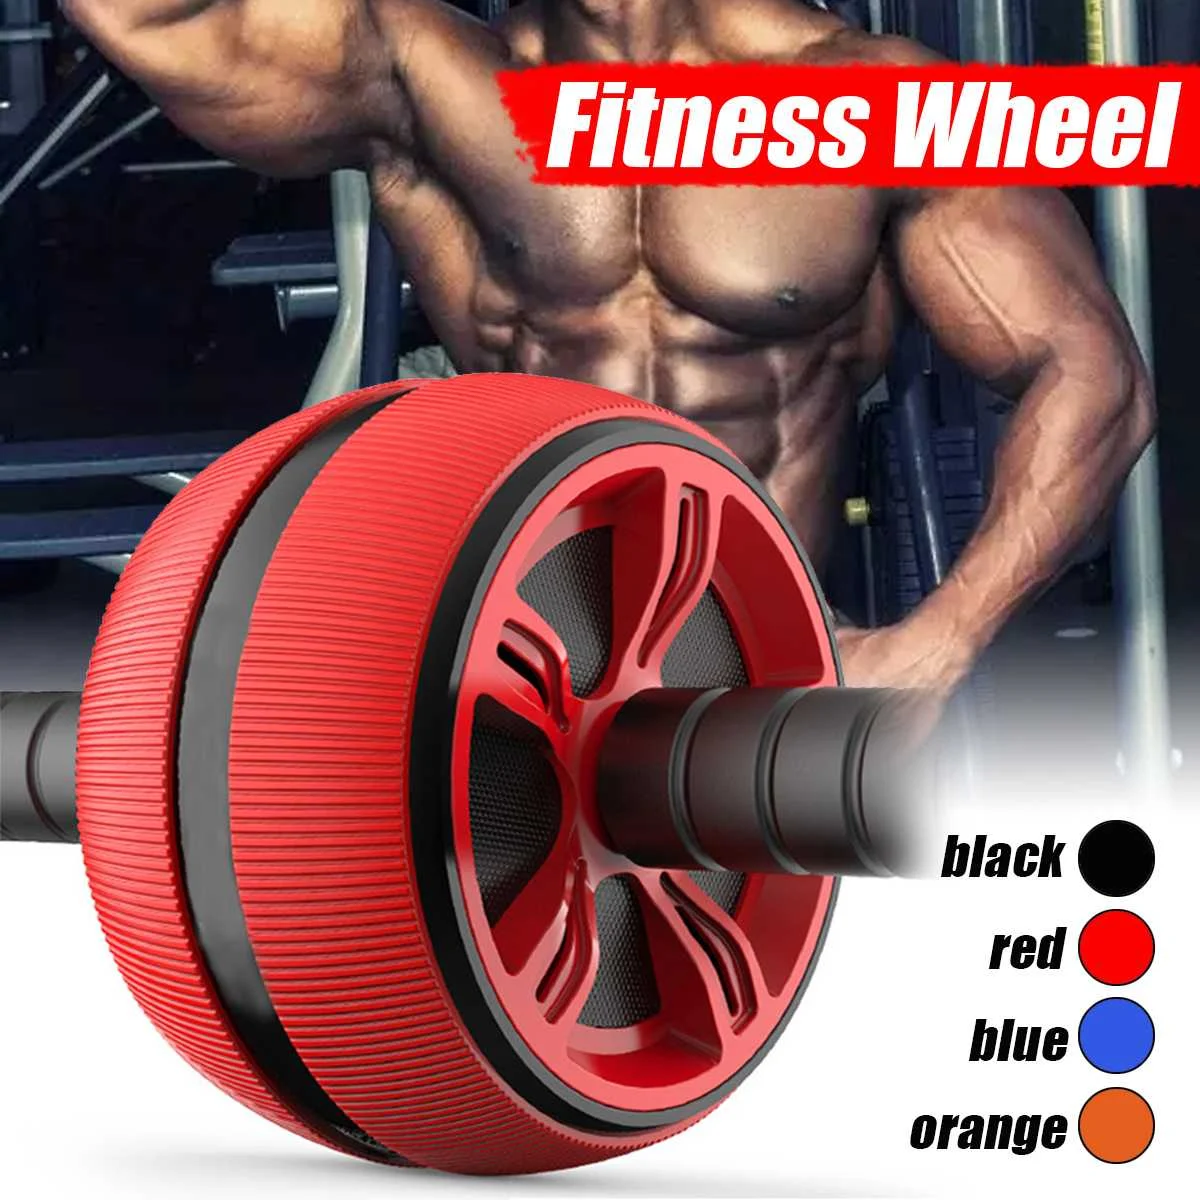 ABS Abdominal Mute Roller Exercise Wheel Core Fitness Muscle Trainer Ab Roller